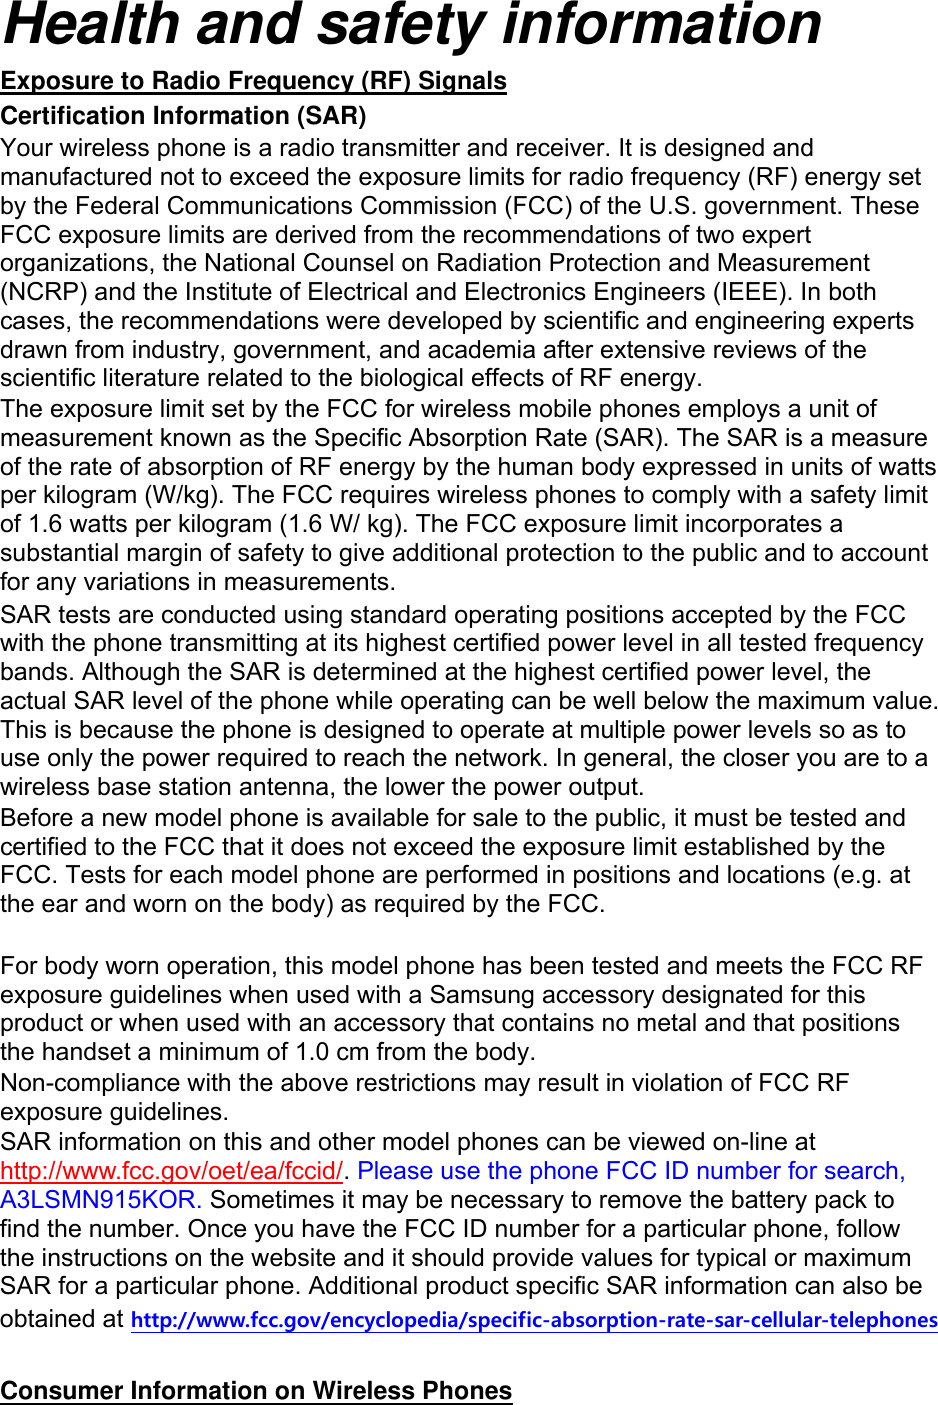 Health and safety information Exposure to Radio Frequency (RF) Signals Certification Information (SAR) Your wireless phone is a radio transmitter and receiver. It is designed and manufactured not to exceed the exposure limits for radio frequency (RF) energy set by the Federal Communications Commission (FCC) of the U.S. government. These FCC exposure limits are derived from the recommendations of two expert organizations, the National Counsel on Radiation Protection and Measurement (NCRP) and the Institute of Electrical and Electronics Engineers (IEEE). In both cases, the recommendations were developed by scientific and engineering experts drawn from industry, government, and academia after extensive reviews of the scientific literature related to the biological effects of RF energy. The exposure limit set by the FCC for wireless mobile phones employs a unit of measurement known as the Specific Absorption Rate (SAR). The SAR is a measure of the rate of absorption of RF energy by the human body expressed in units of watts per kilogram (W/kg). The FCC requires wireless phones to comply with a safety limit of 1.6 watts per kilogram (1.6 W/ kg). The FCC exposure limit incorporates a substantial margin of safety to give additional protection to the public and to account for any variations in measurements. SAR tests are conducted using standard operating positions accepted by the FCC with the phone transmitting at its highest certified power level in all tested frequency bands. Although the SAR is determined at the highest certified power level, the actual SAR level of the phone while operating can be well below the maximum value. This is because the phone is designed to operate at multiple power levels so as to use only the power required to reach the network. In general, the closer you are to a wireless base station antenna, the lower the power output. Before a new model phone is available for sale to the public, it must be tested and certified to the FCC that it does not exceed the exposure limit established by the FCC. Tests for each model phone are performed in positions and locations (e.g. at the ear and worn on the body) as required by the FCC.      For body worn operation, this model phone has been tested and meets the FCC RF exposure guidelines when used with a Samsung accessory designated for this product or when used with an accessory that contains no metal and that positions the handset a minimum of 1.0 cm from the body.   Non-compliance with the above restrictions may result in violation of FCC RF exposure guidelines. SAR information on this and other model phones can be viewed on-line at http://www.fcc.gov/oet/ea/fccid/. Please use the phone FCC ID number for search, A3LSMN915KOR. Sometimes it may be necessary to remove the battery pack to find the number. Once you have the FCC ID number for a particular phone, follow the instructions on the website and it should provide values for typical or maximum SAR for a particular phone. Additional product specific SAR information can also be obtained at http://www.fcc.gov/encyclopedia/specific-absorption-rate-sar-cellular-telephones  Consumer Information on Wireless Phones 